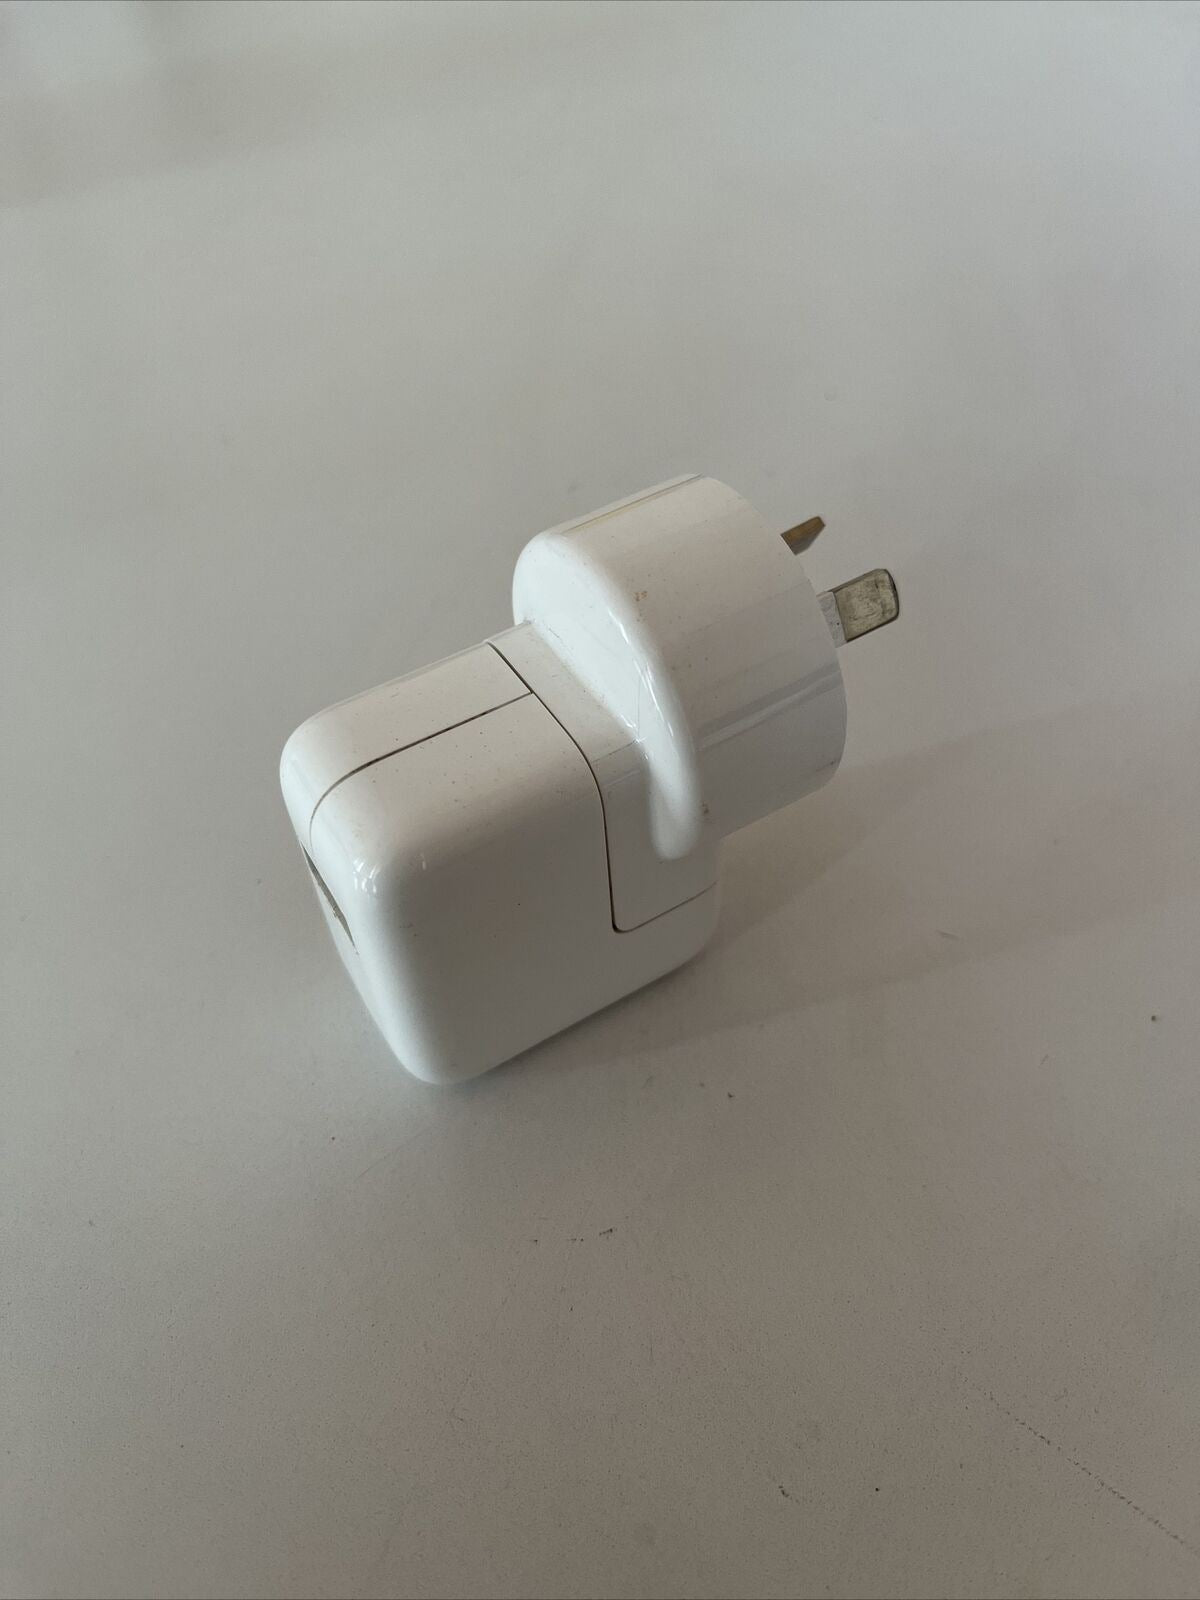 Genuine Apple 10W USB Power Adapter A1357 for iPhone, iPad, iPod